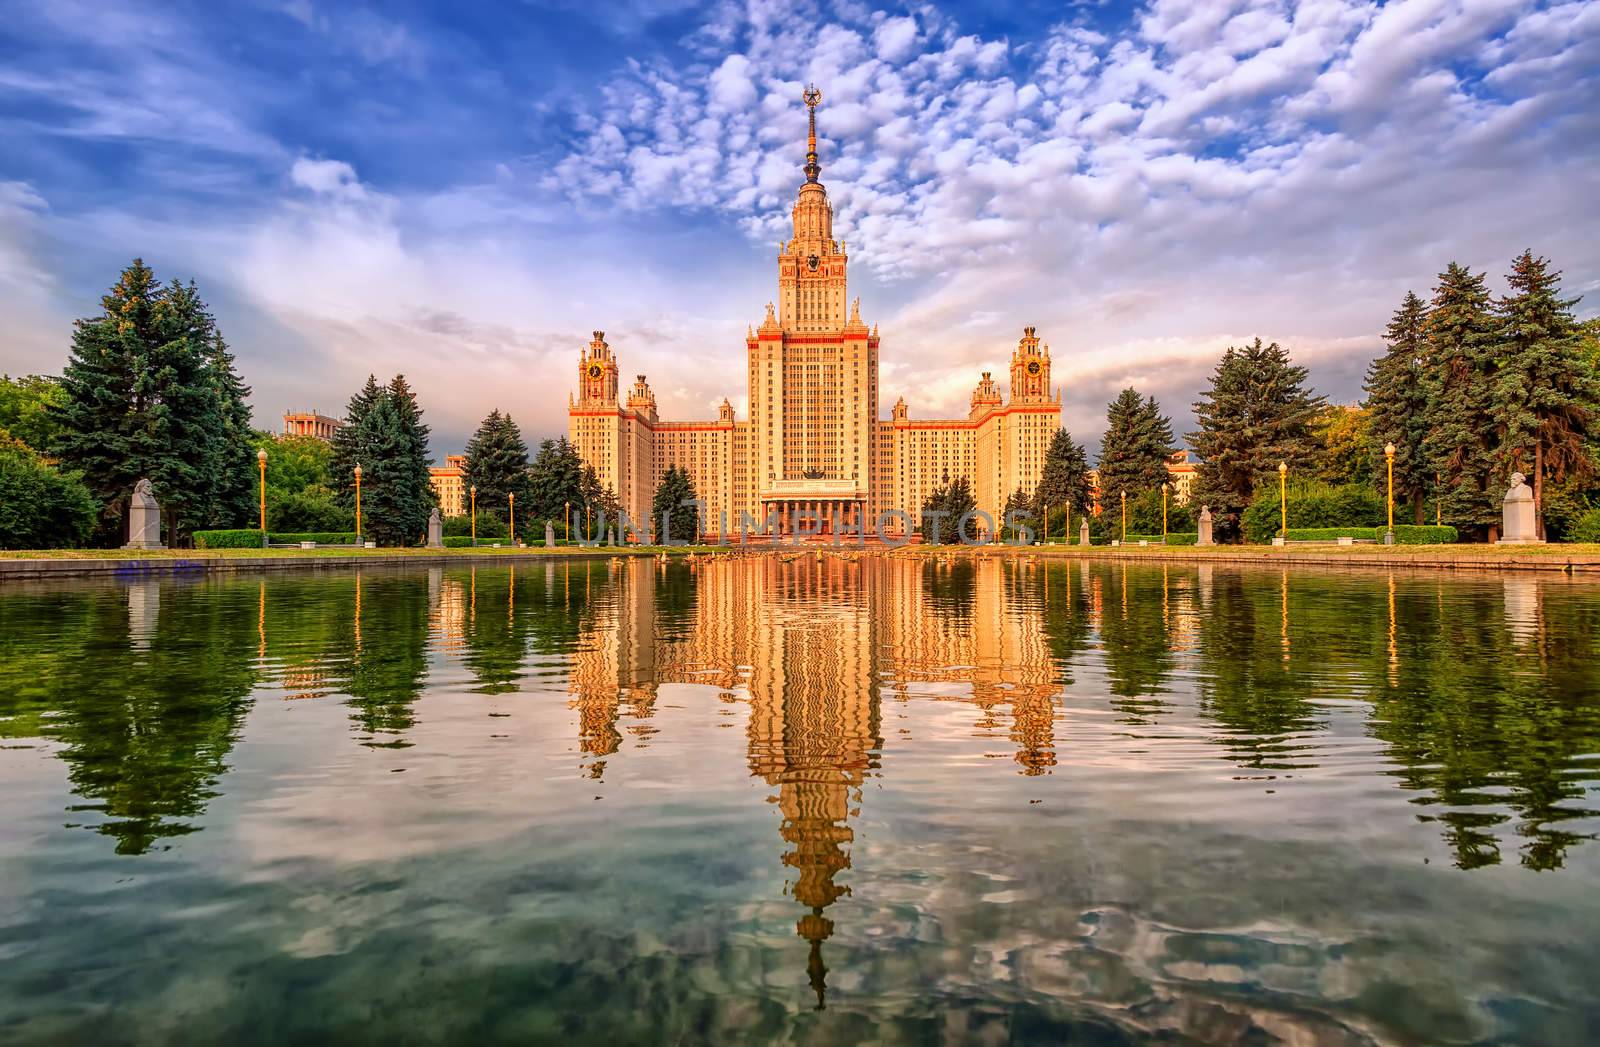 Neoclassical Moscow State University (MGU) building on Vorobyevy Gory, reflecting in lake, Russia